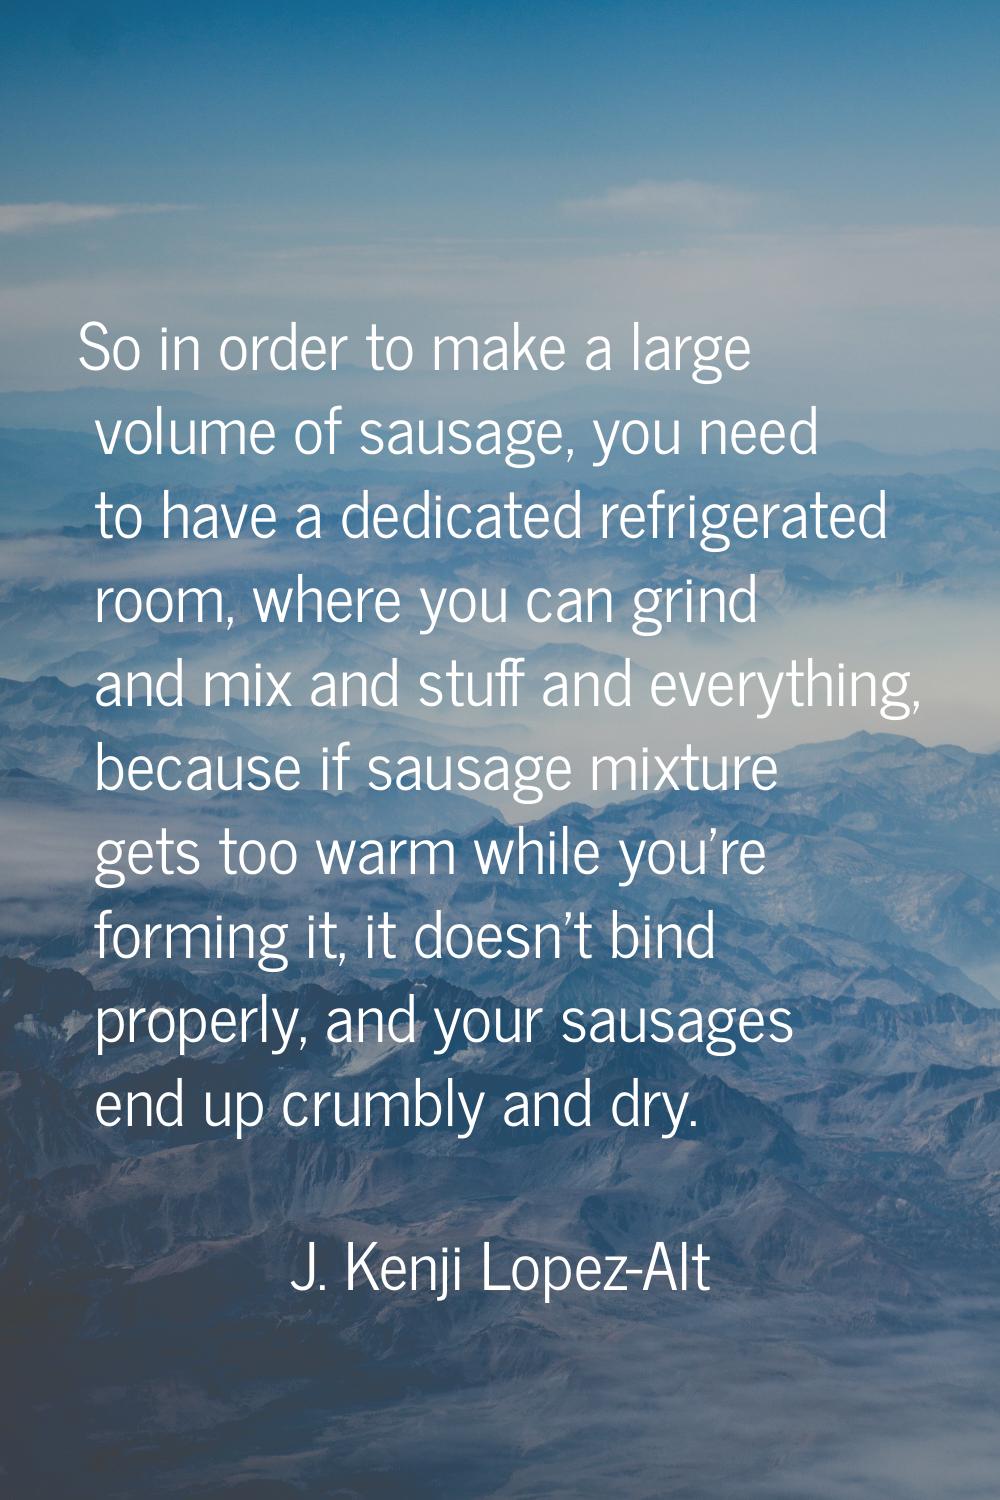 So in order to make a large volume of sausage, you need to have a dedicated refrigerated room, wher